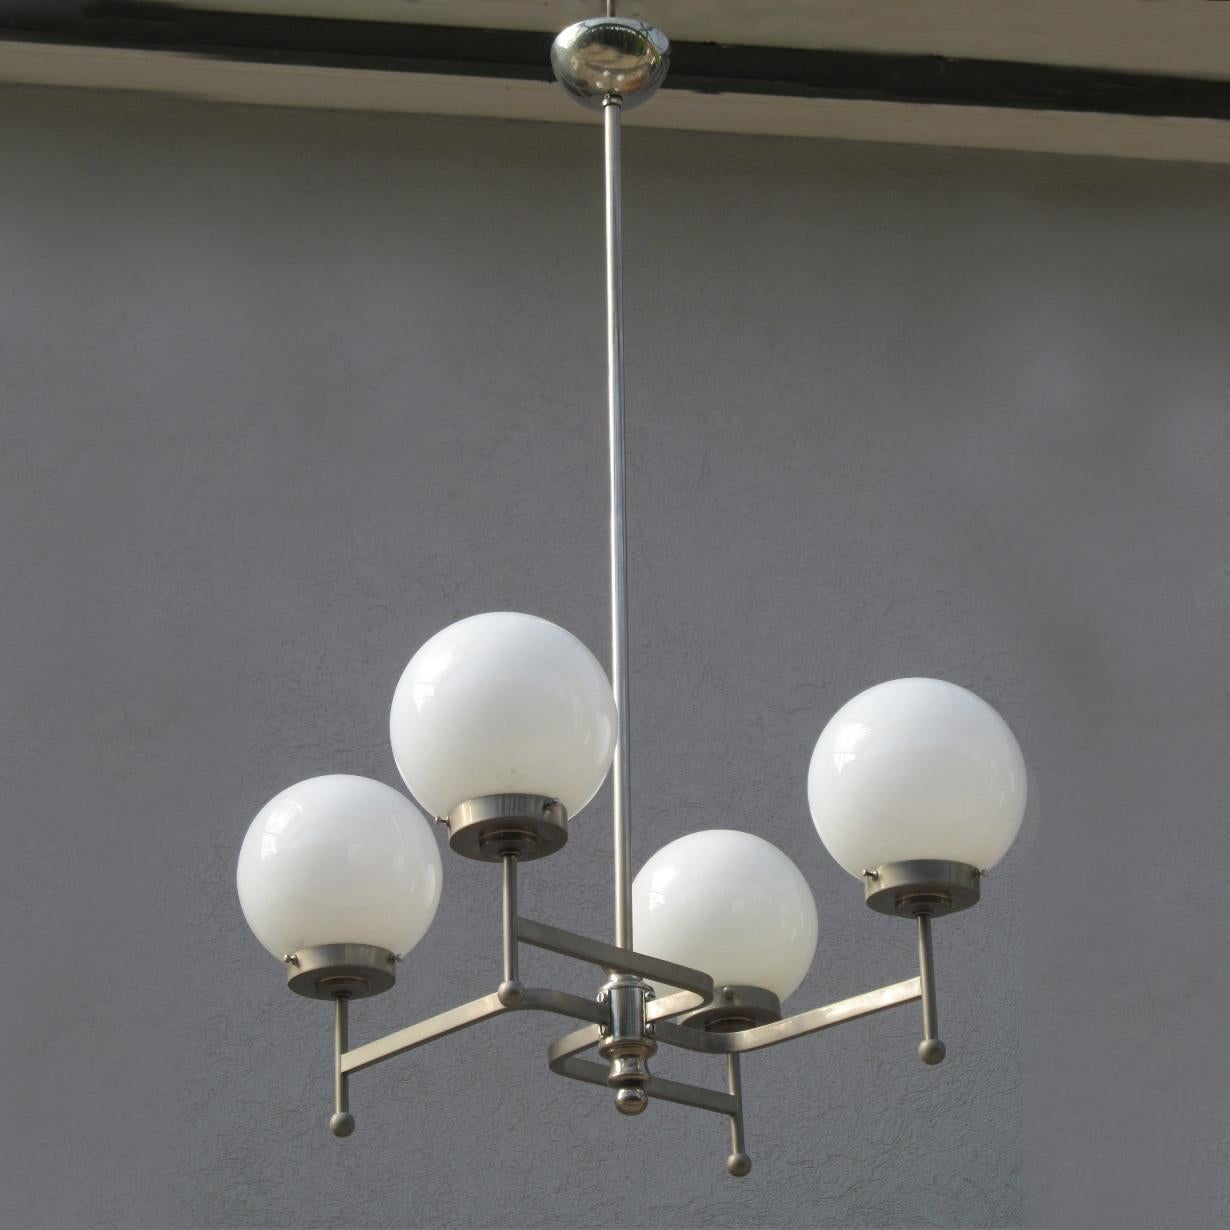 Exceptional and rare Bauhaus chandelier in nickel plated brass and original opaline spheres.
The chandelier is from early 1930s iand made in a form of Japanese Buddhist Manji symbol, a predominant Buddhist symbol in Japan.
The ‘counterclock’ Manji